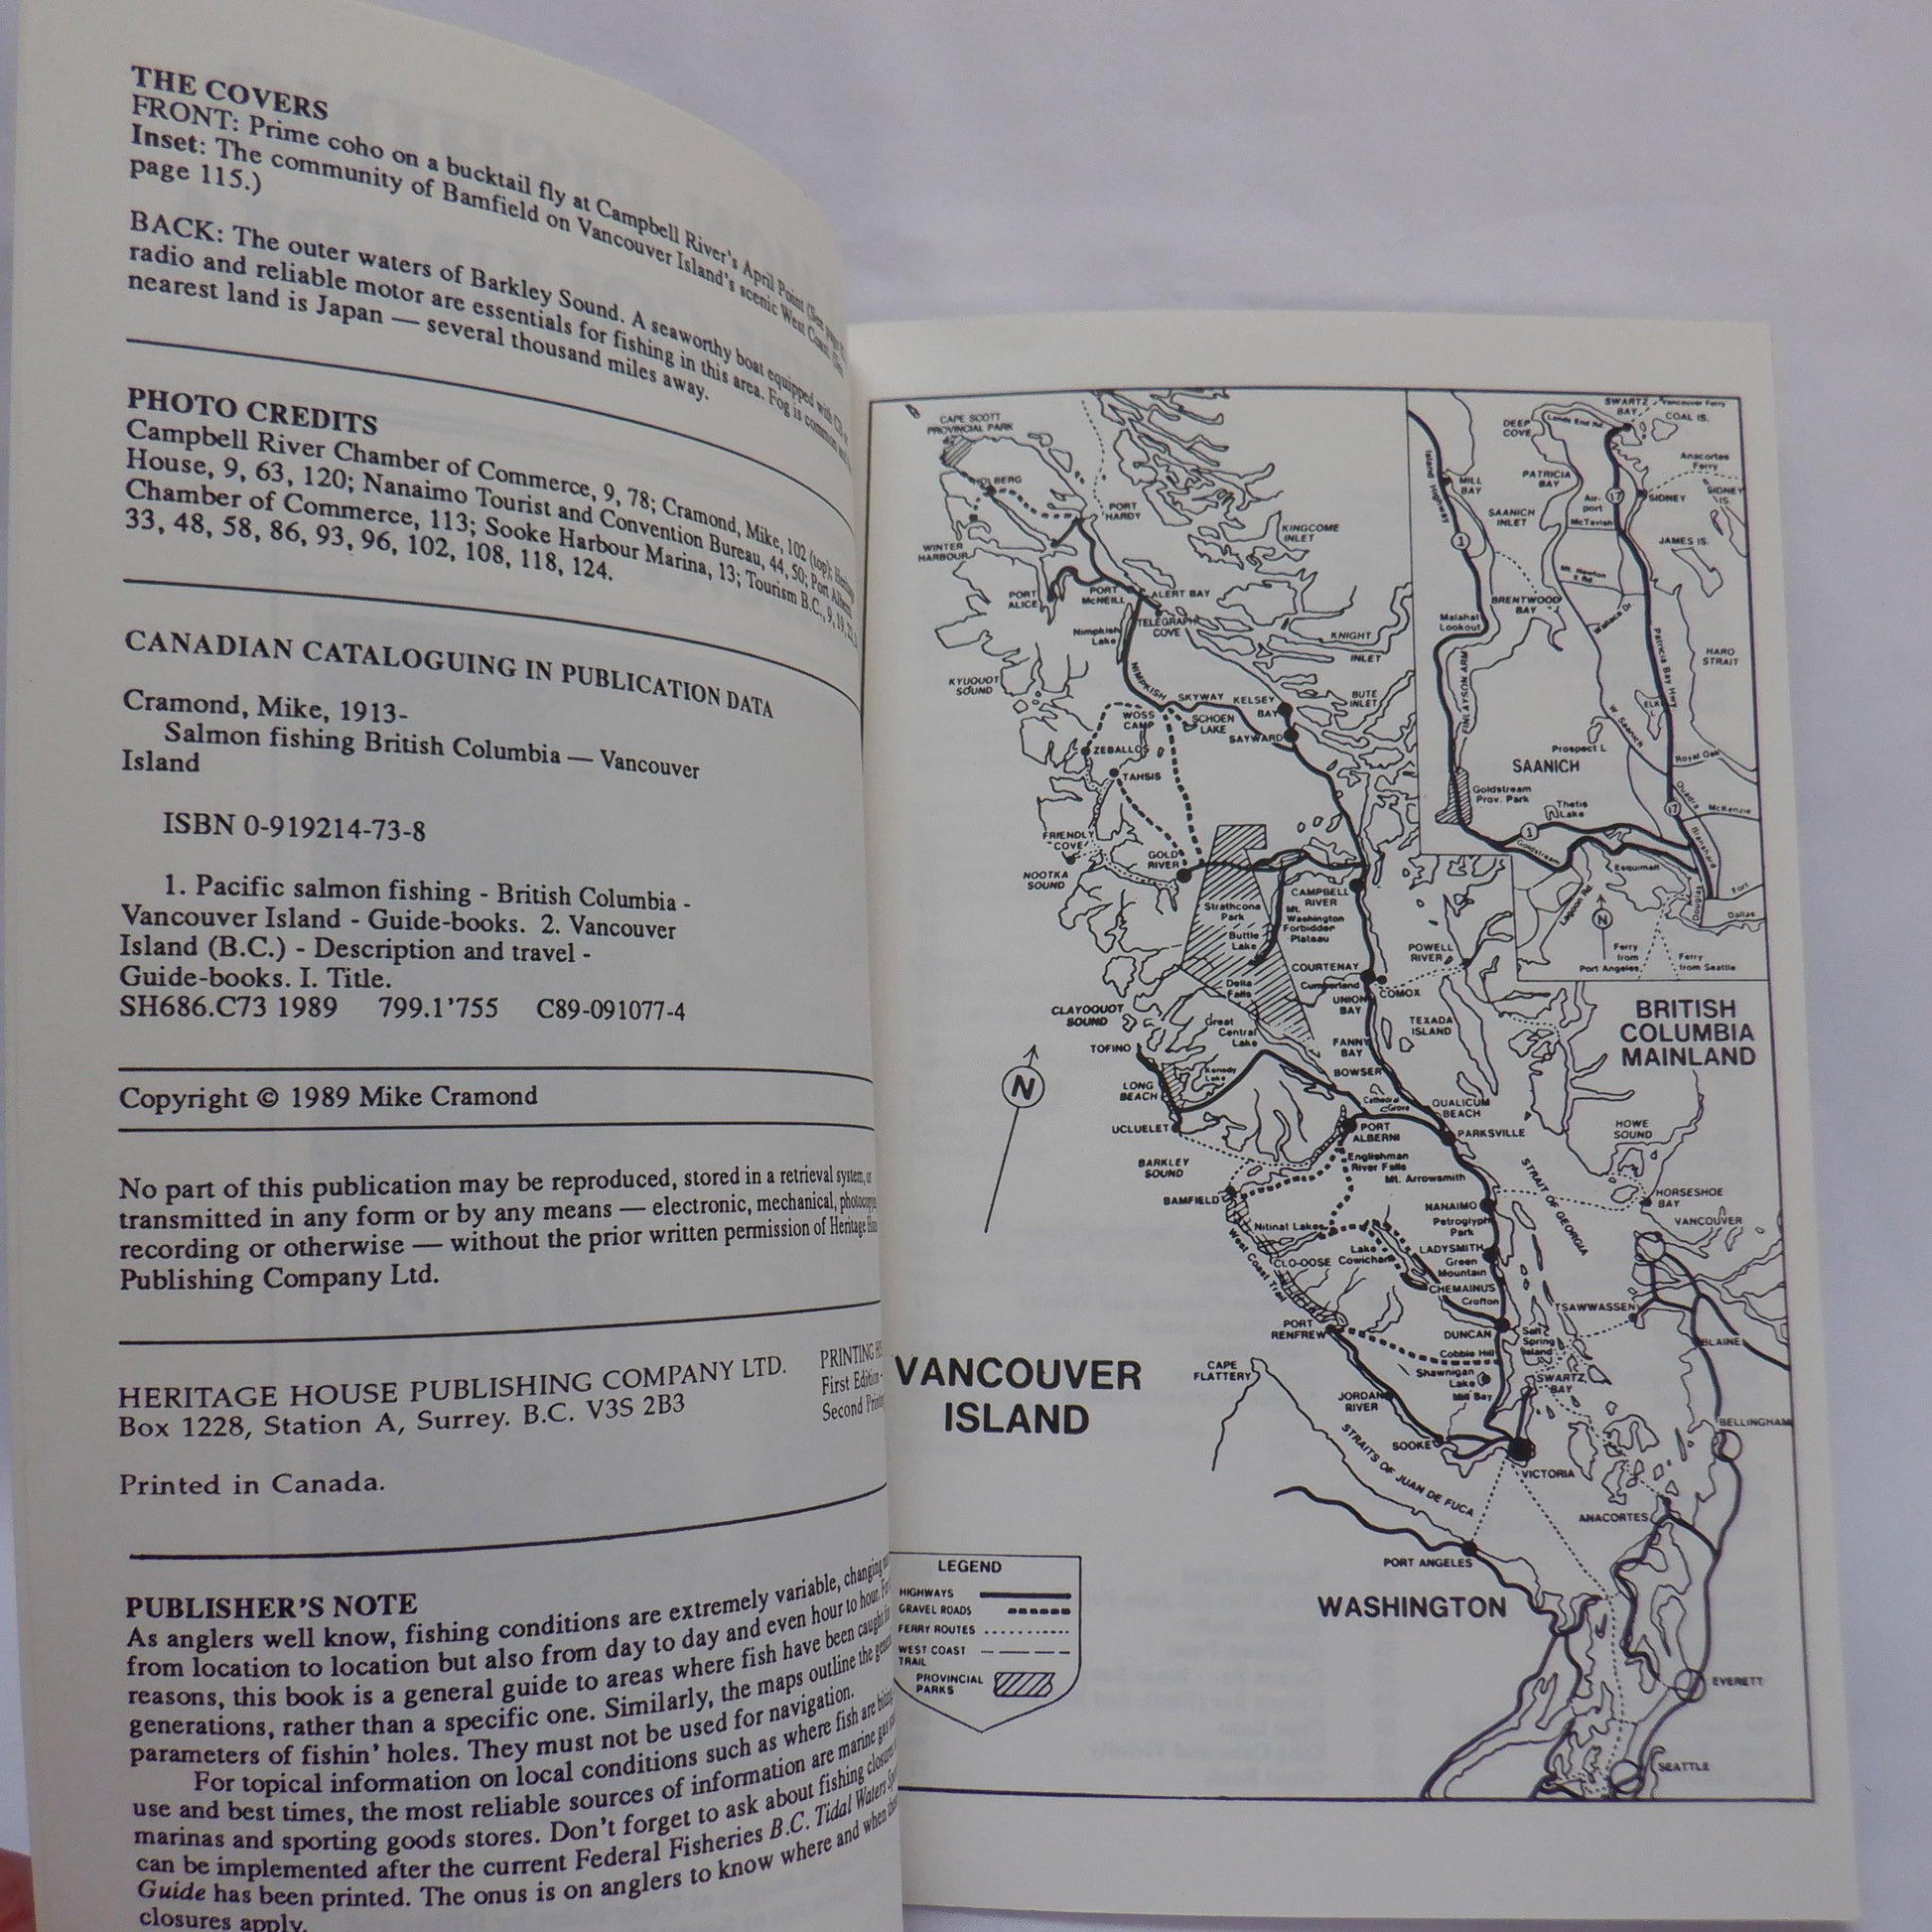 SALMON FISHING BRITISH COLUMBIA, Volume 1 Vancouver Island, by Mike Cr –  Gillmore Coins & Collectibles